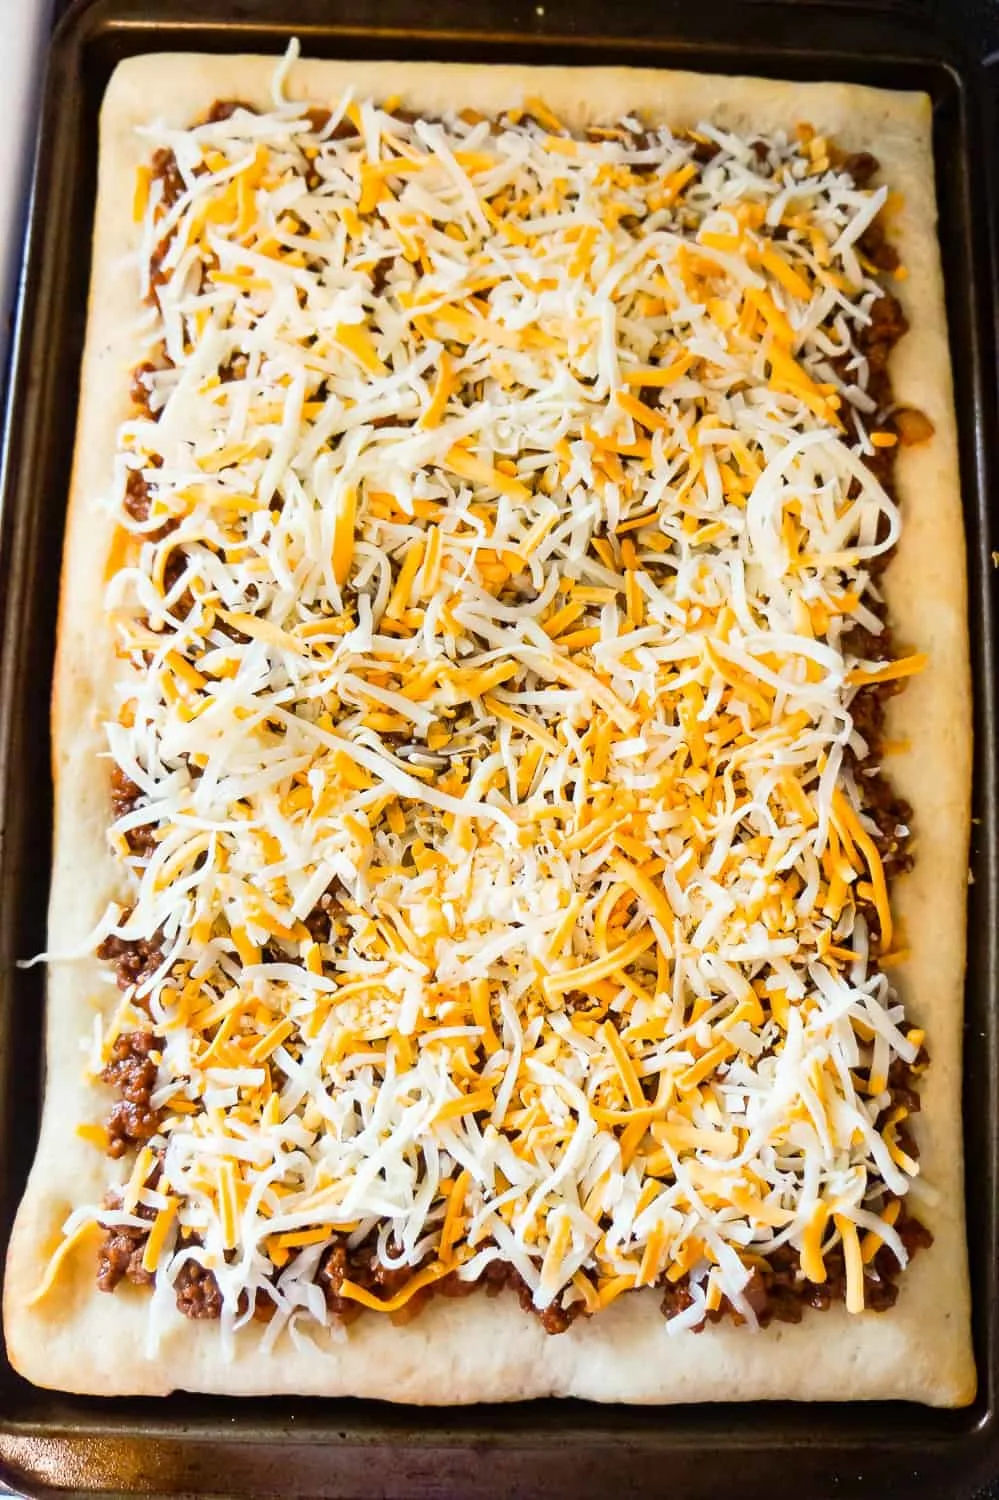 shredded mozzarella and cheddar cheese on top of sloppy joe pizza before baking